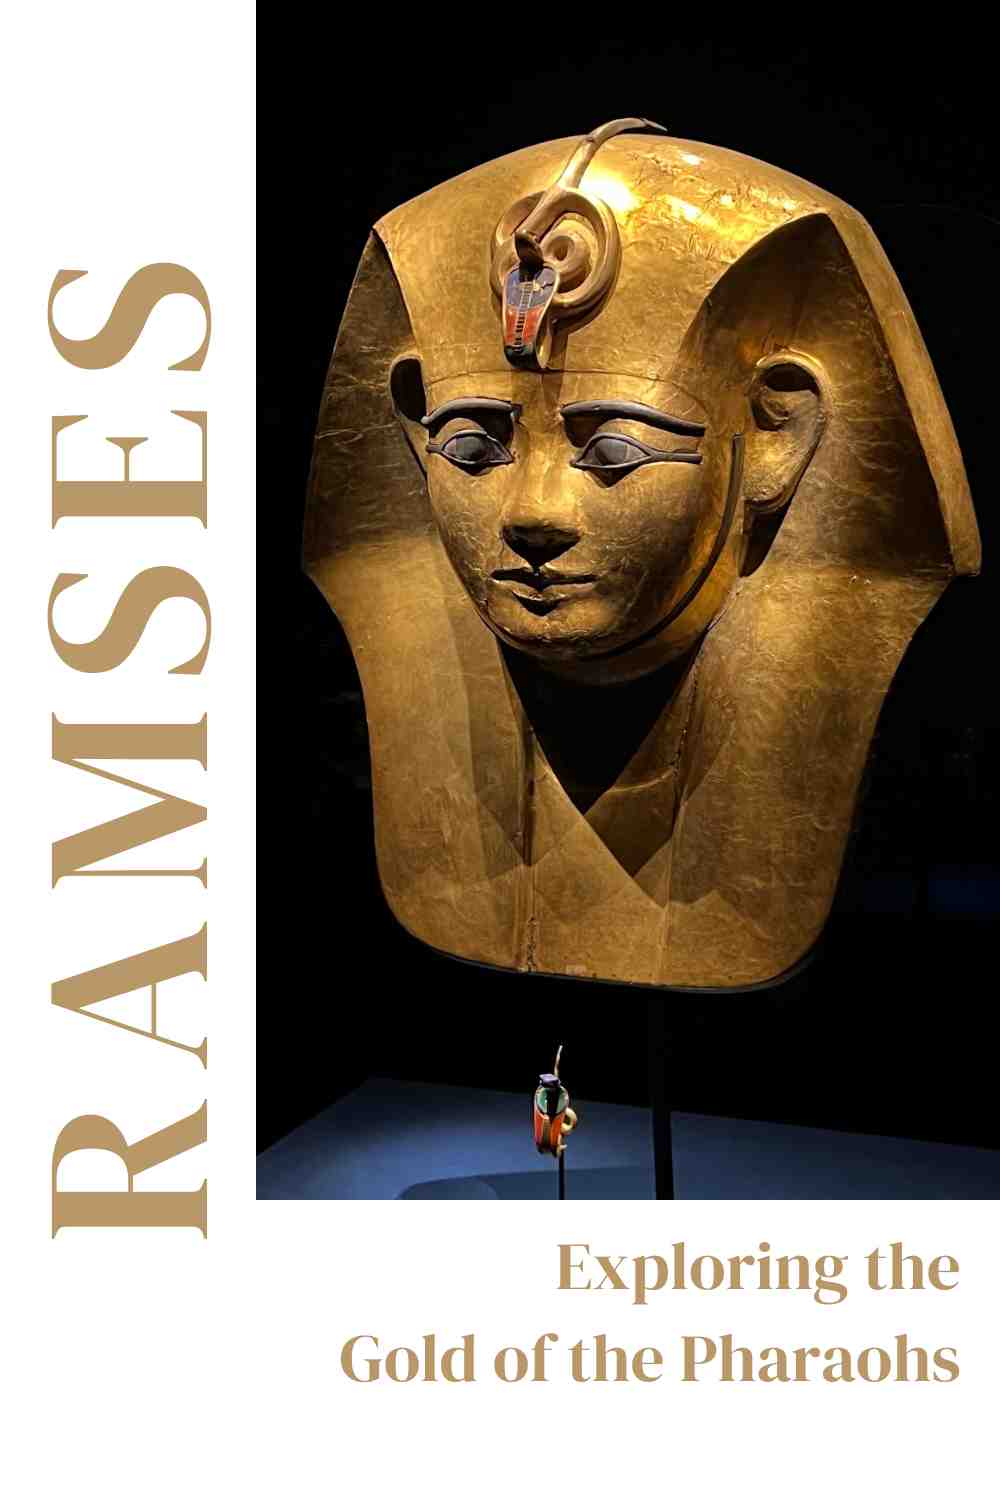 Ramses and the pharaohs in Sydney